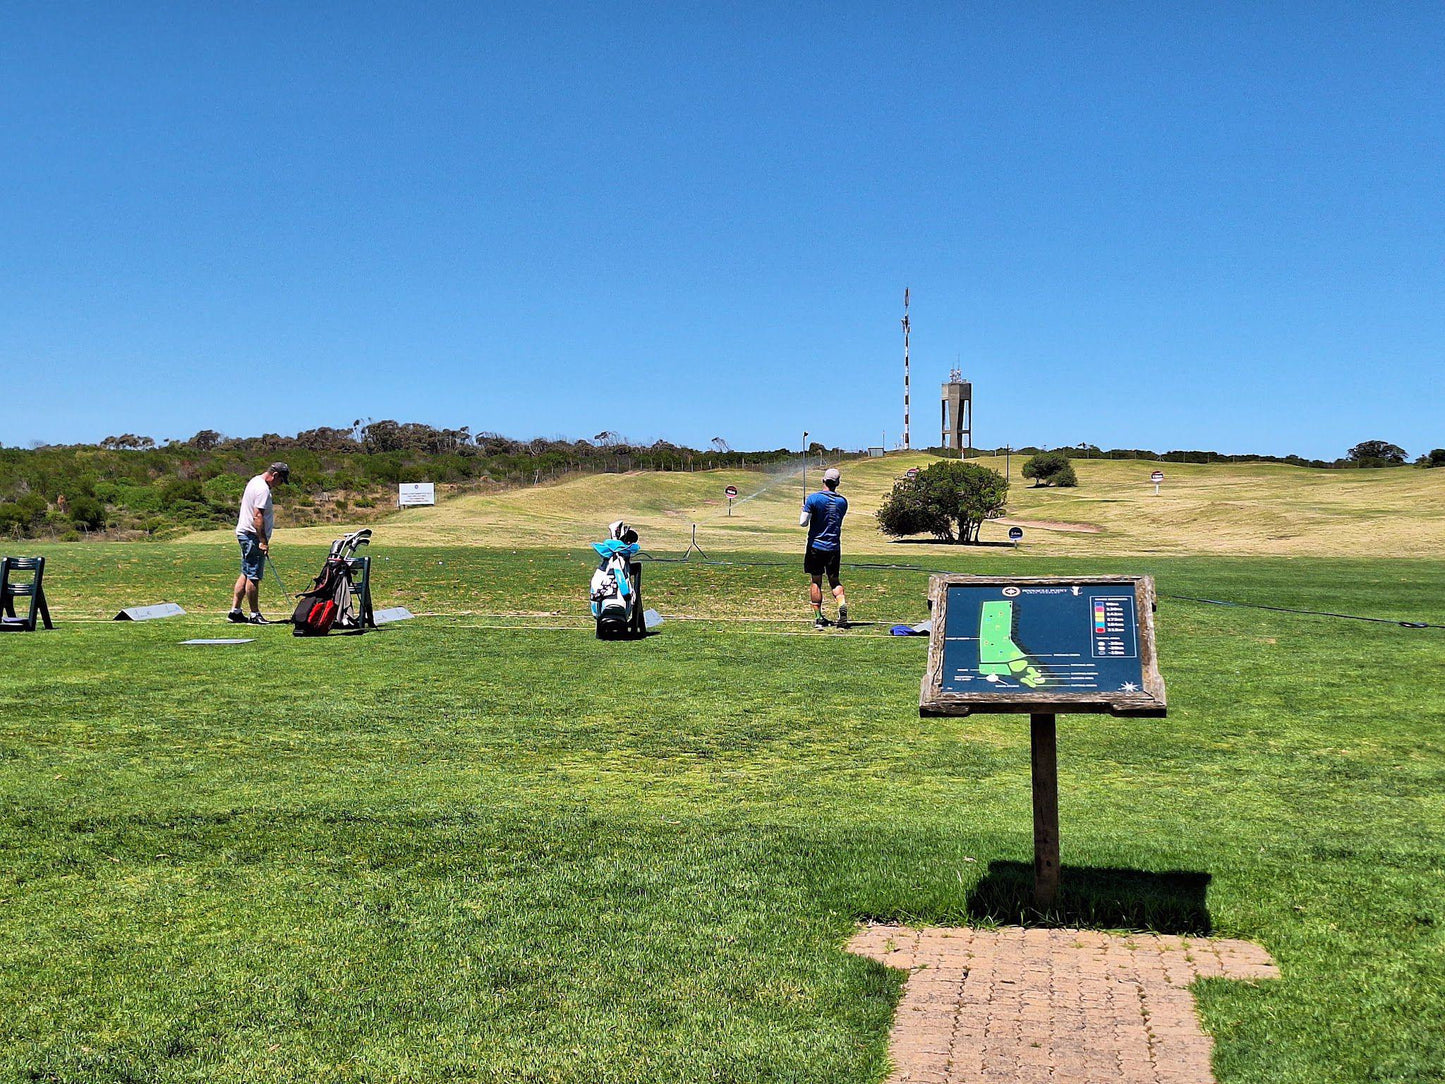 Nature, Complementary Colors, Ball Game, Sport, Golfing, Colorful, Building, Architecture, Person, Ball, Beach, Sand, Tower, Lighthouse, Pinnacle Point Golf Practice Range, 194 Mossel St, D`Almeida, Mossel Bay, 6506